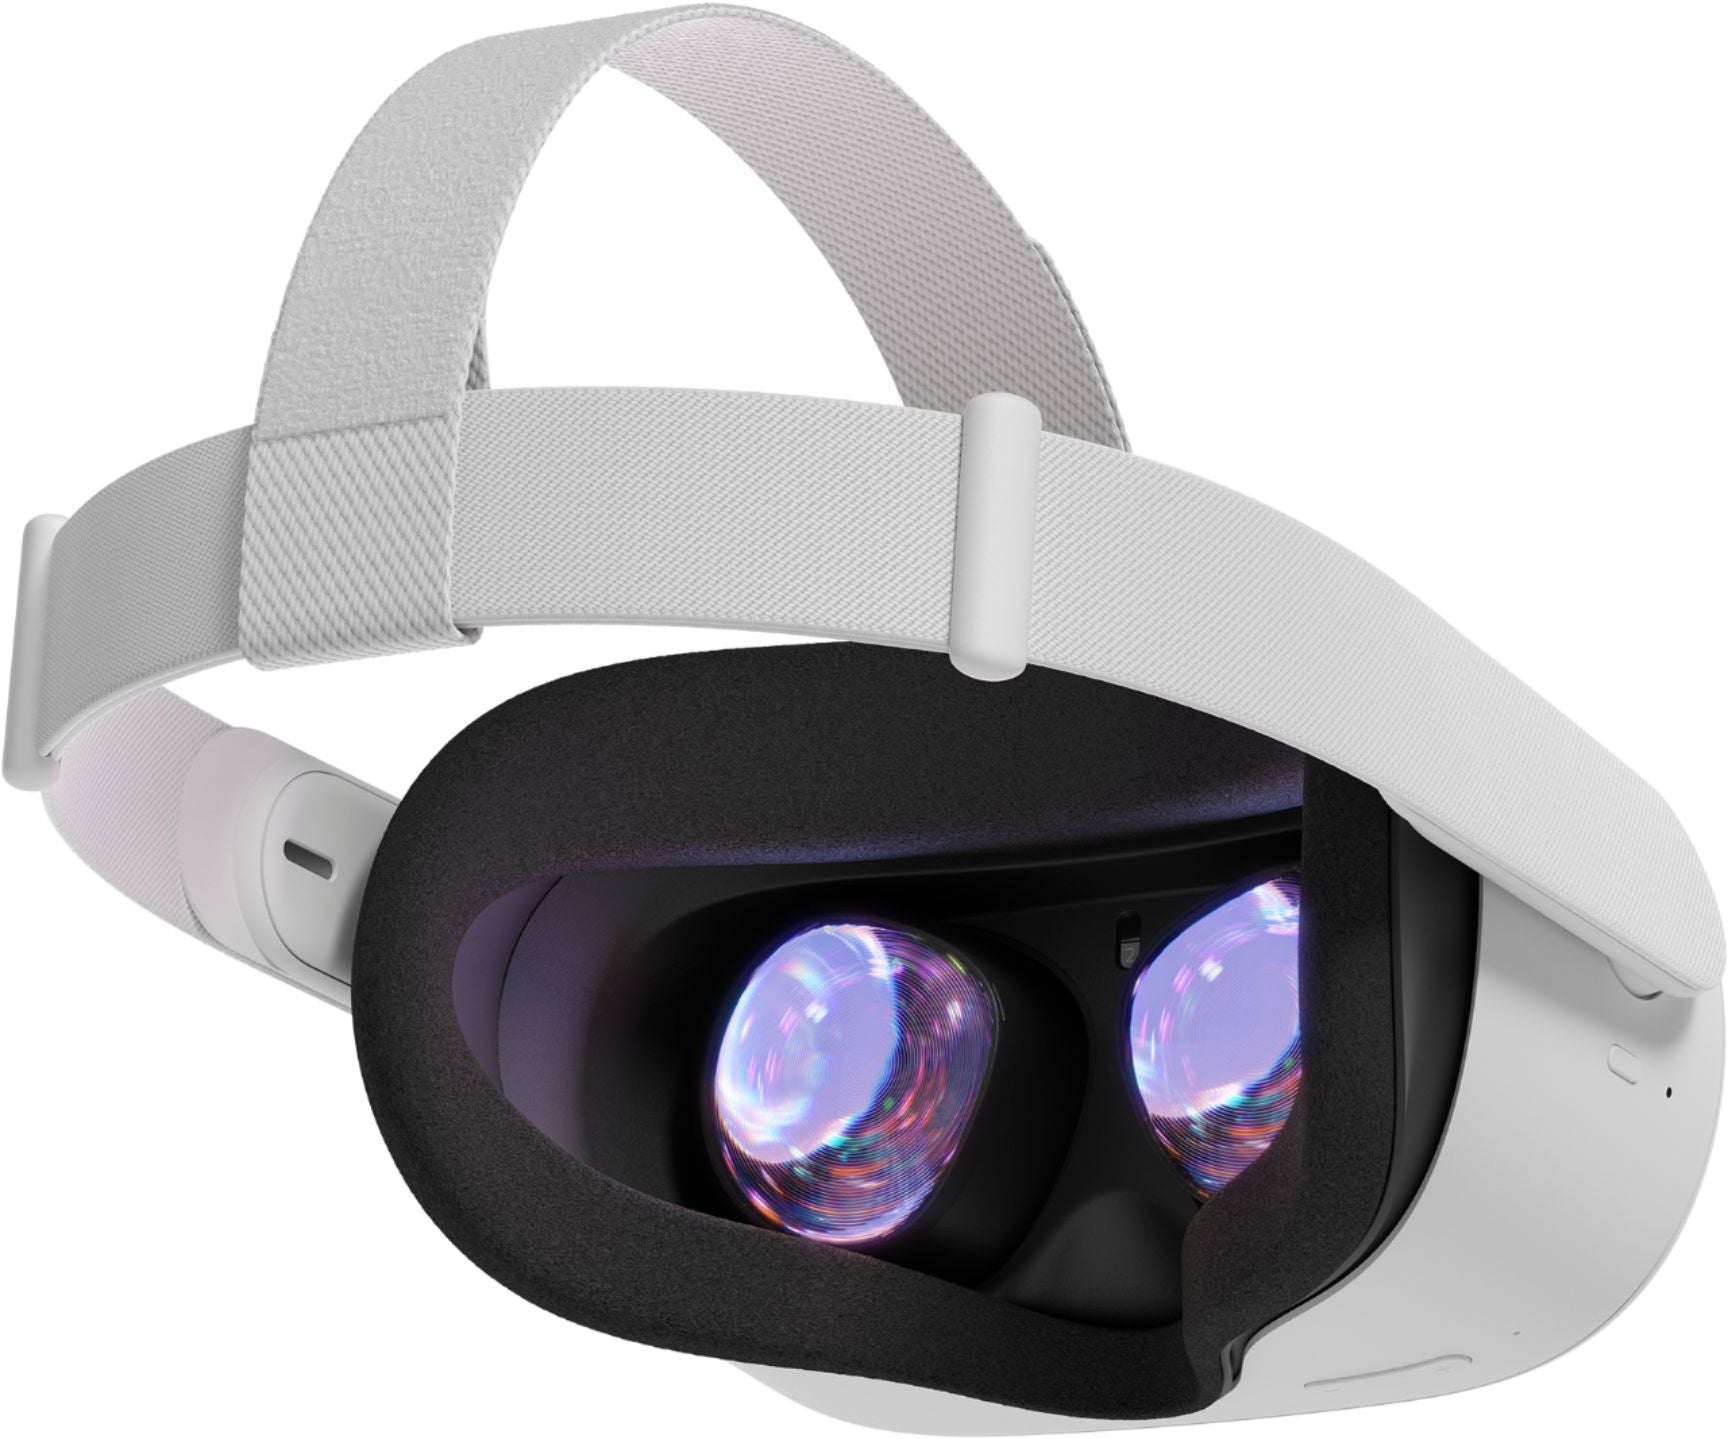 Quest 2 Advanced All-In-One Reality Headset —